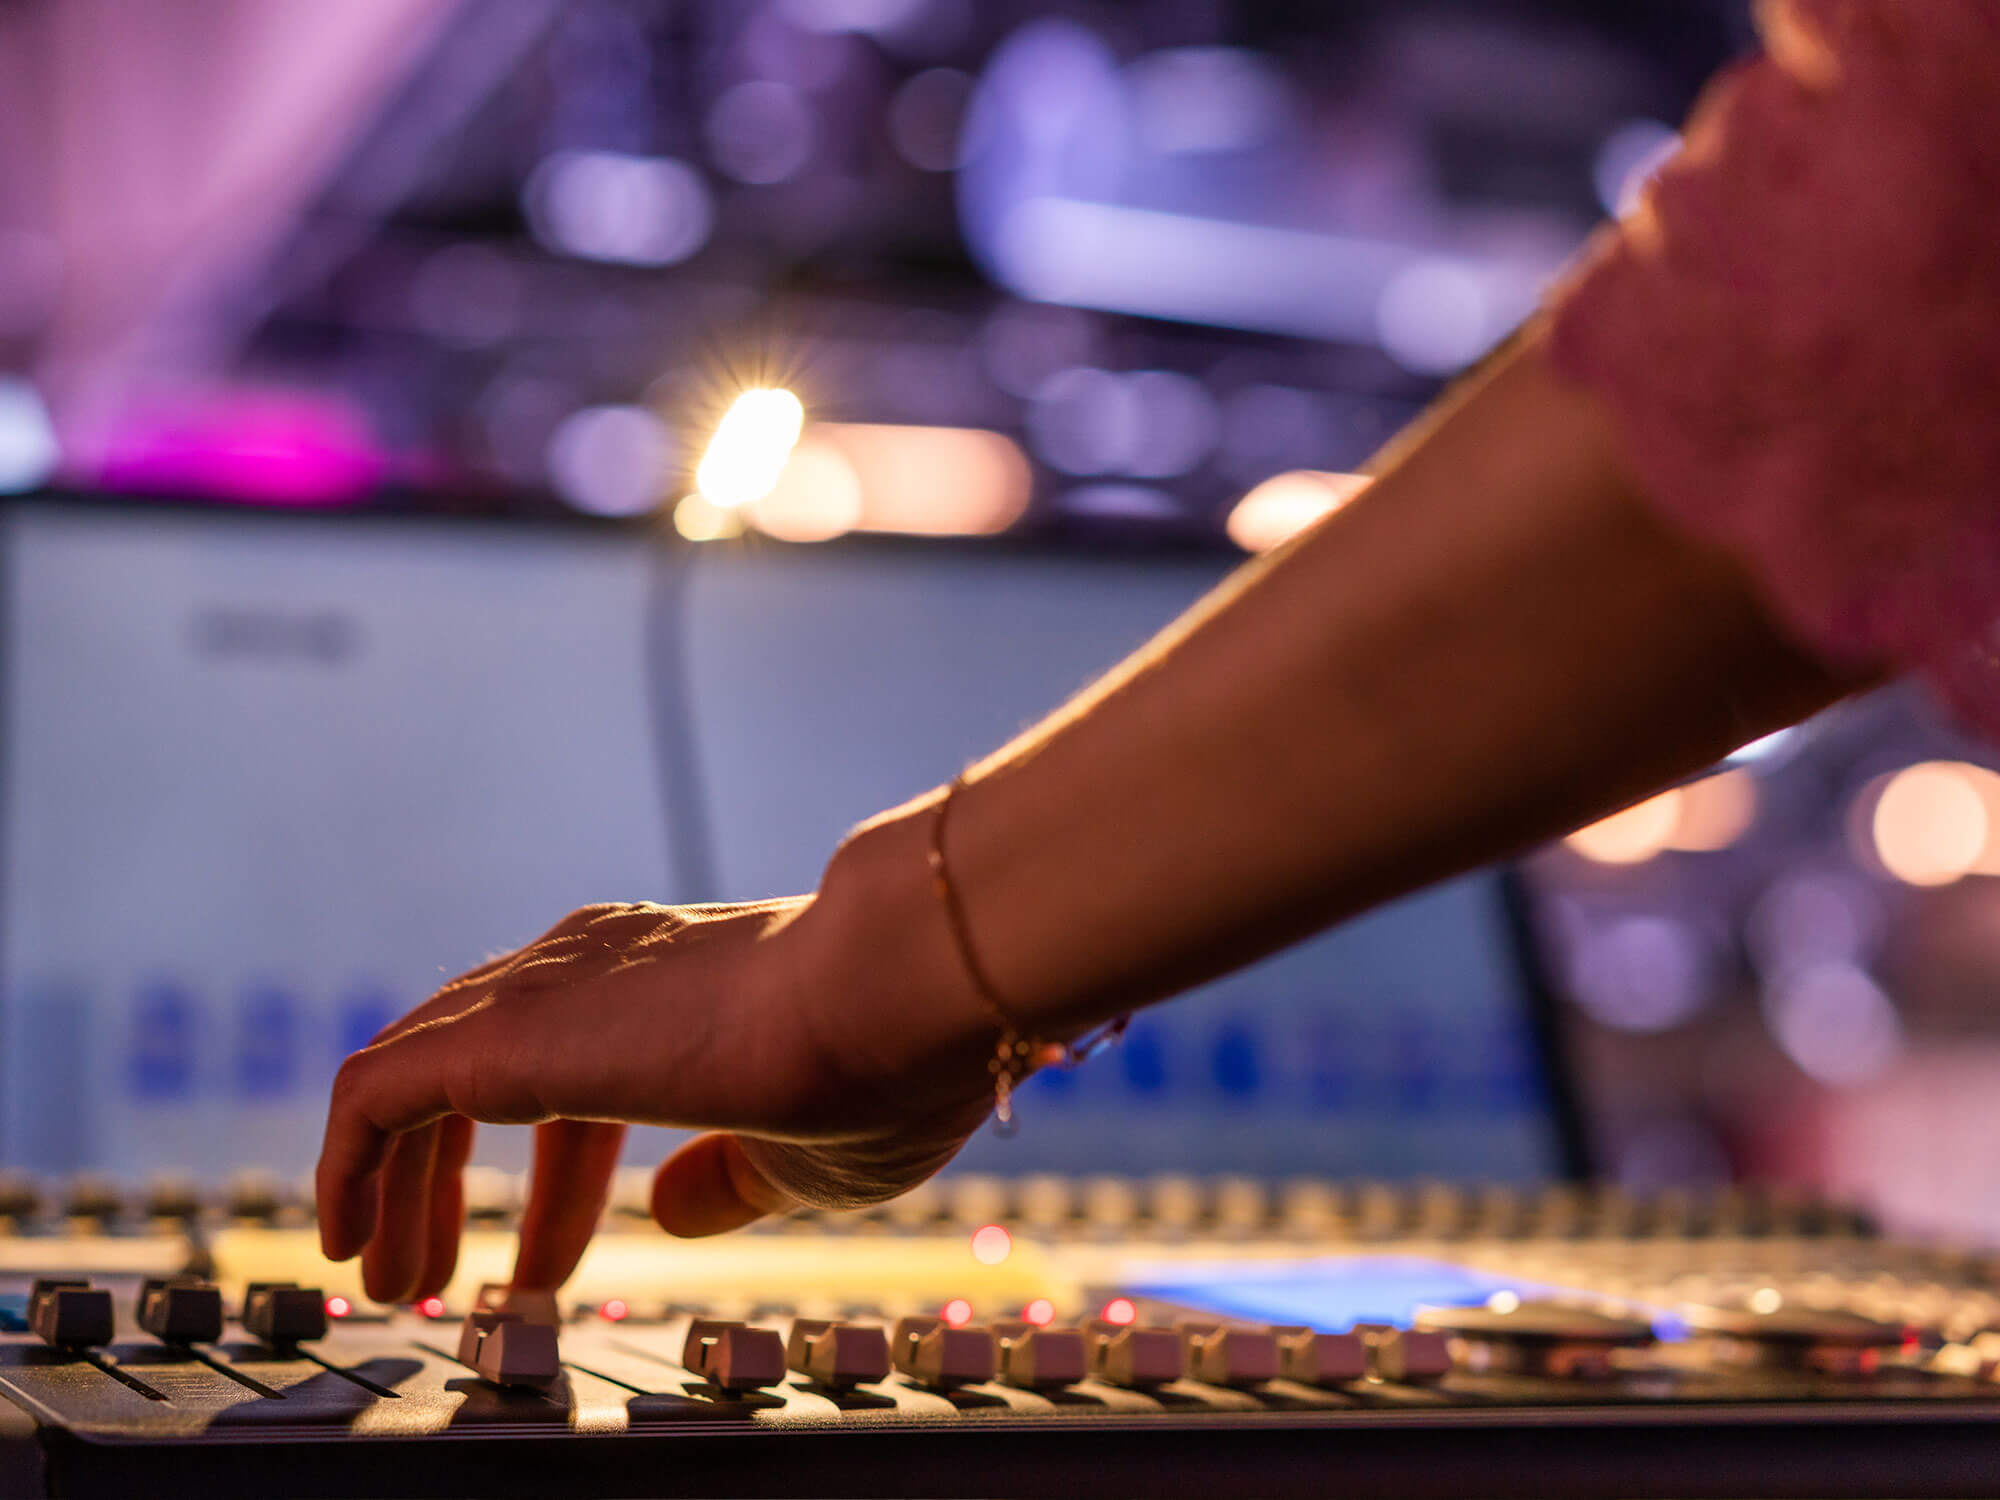 Mix engineer working at a sound desk